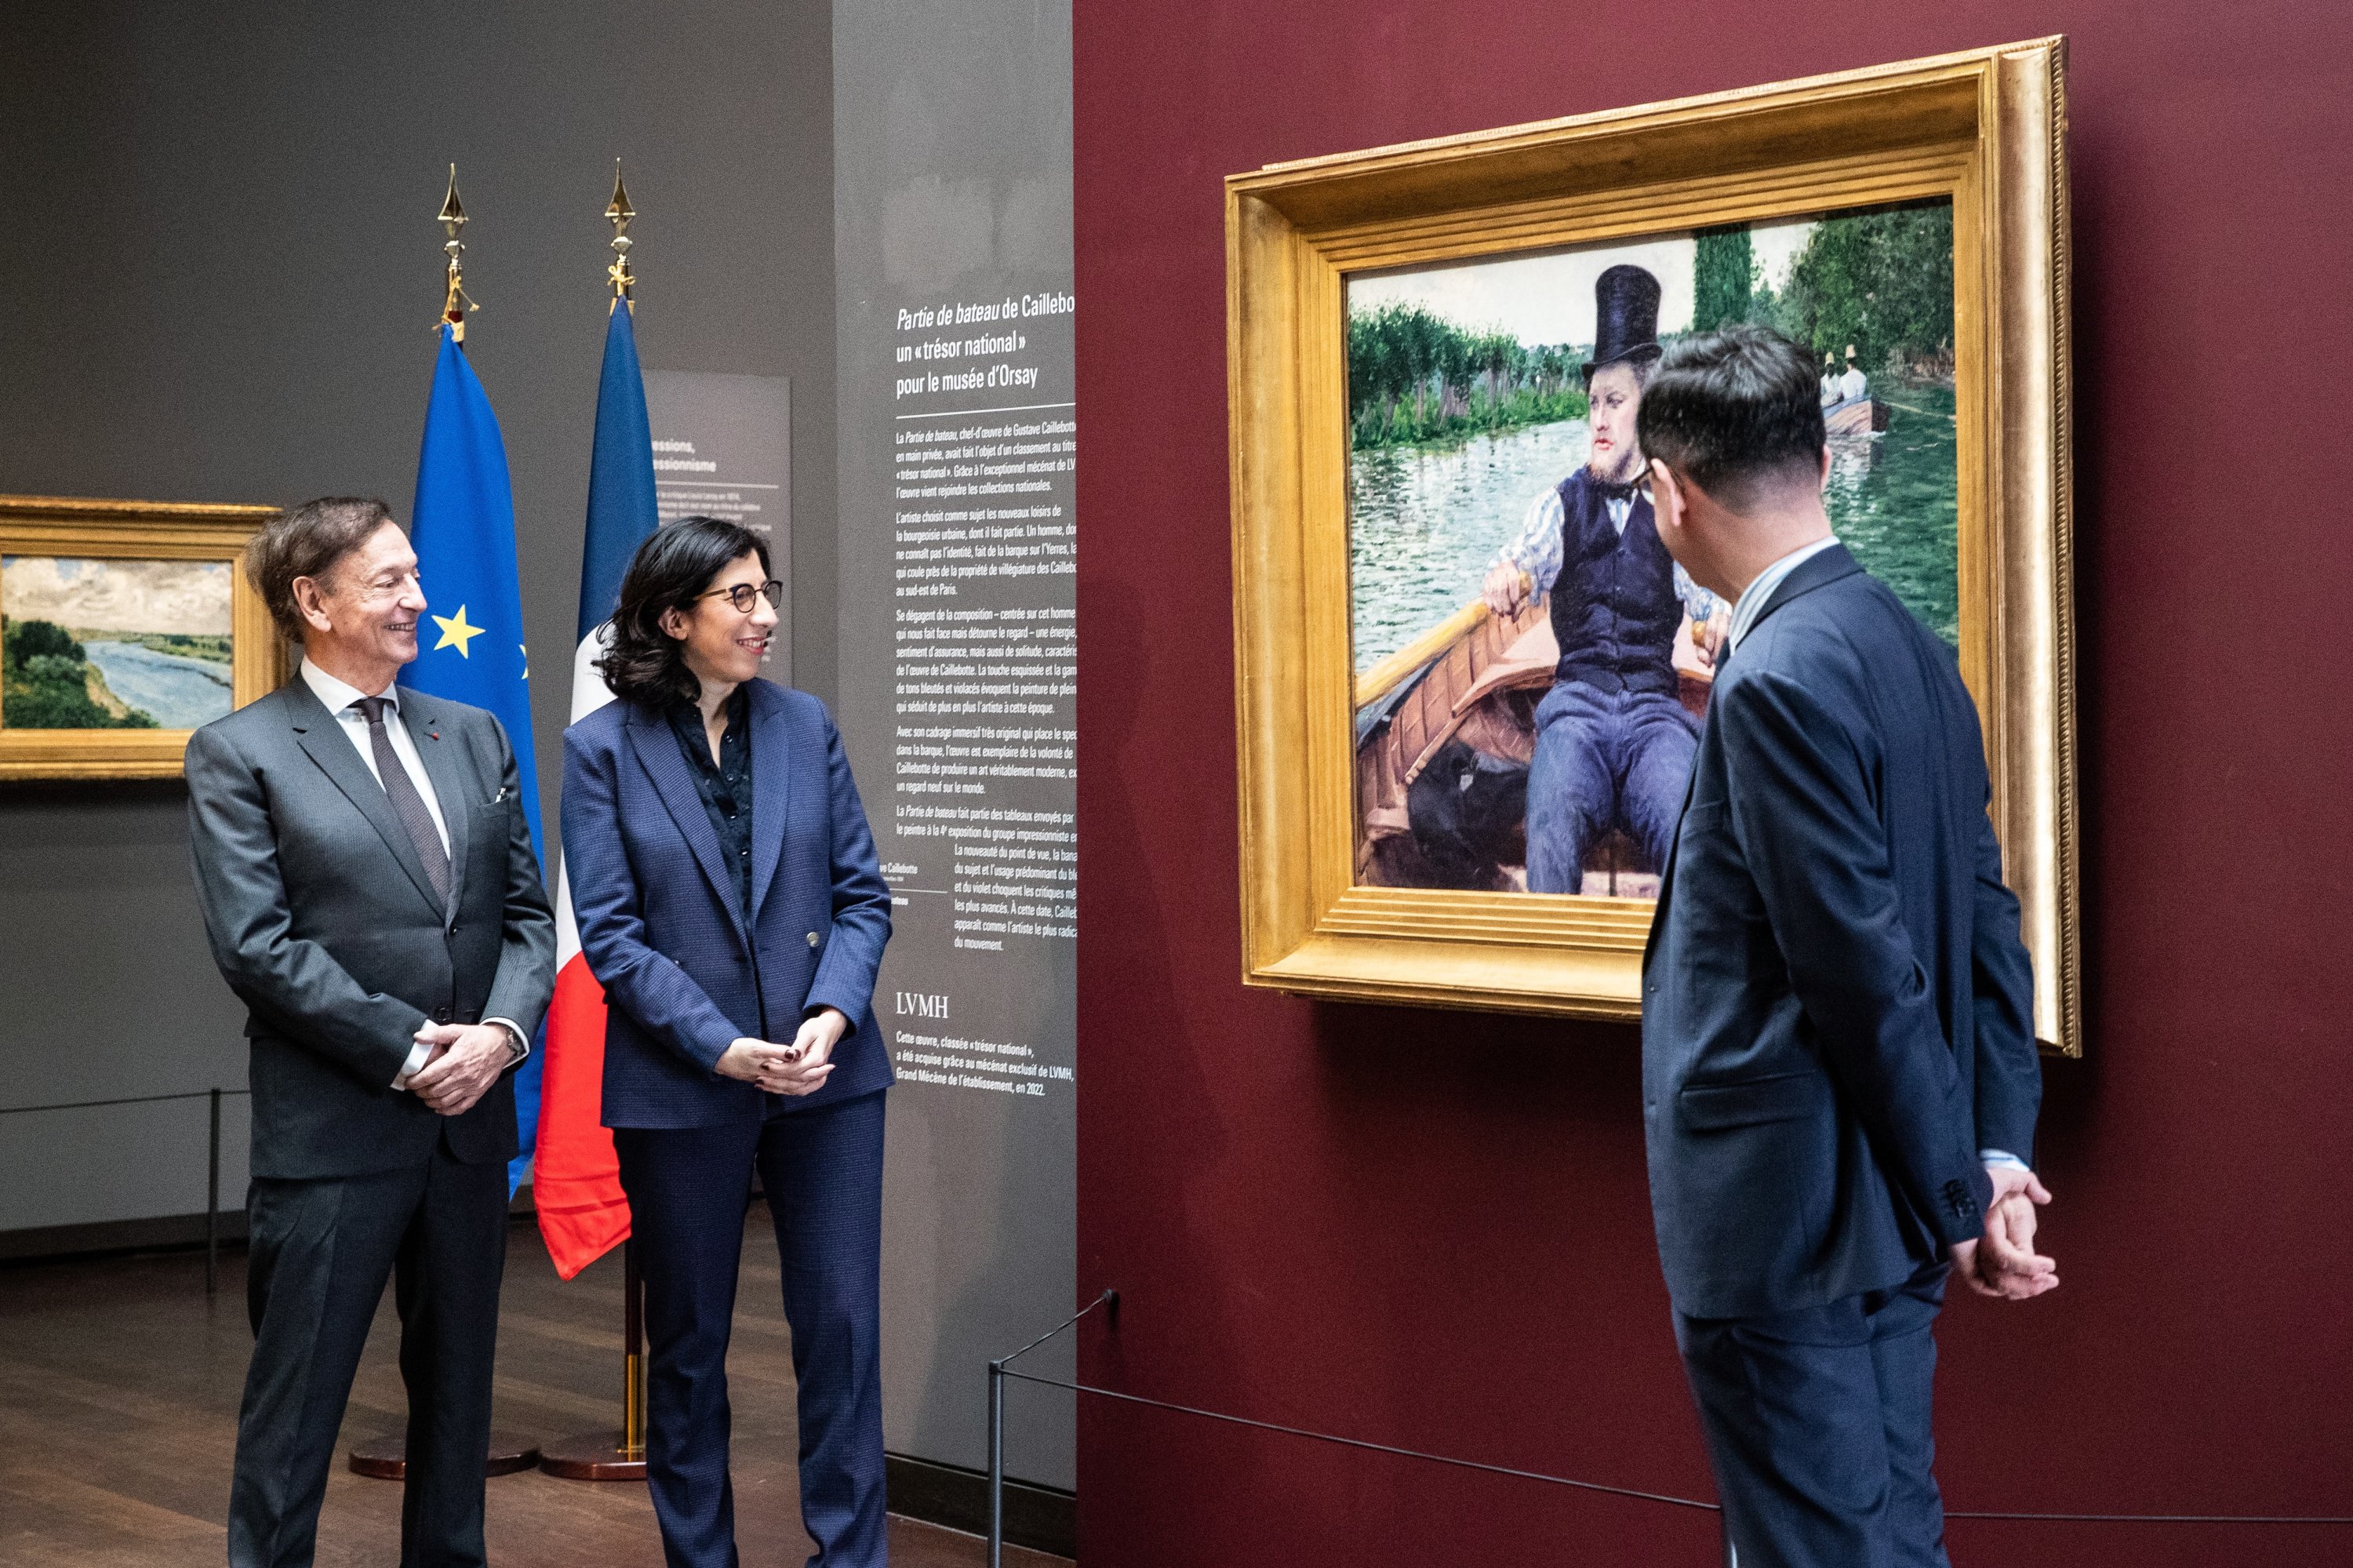 French Minister of Culture Rima Abdul Malak (C), LVMH Group's Patronage Advisor Jean-Paul Claverie (L) and President of Orsay Museum Christophe Leribault (R) attend the presentation of the painting 